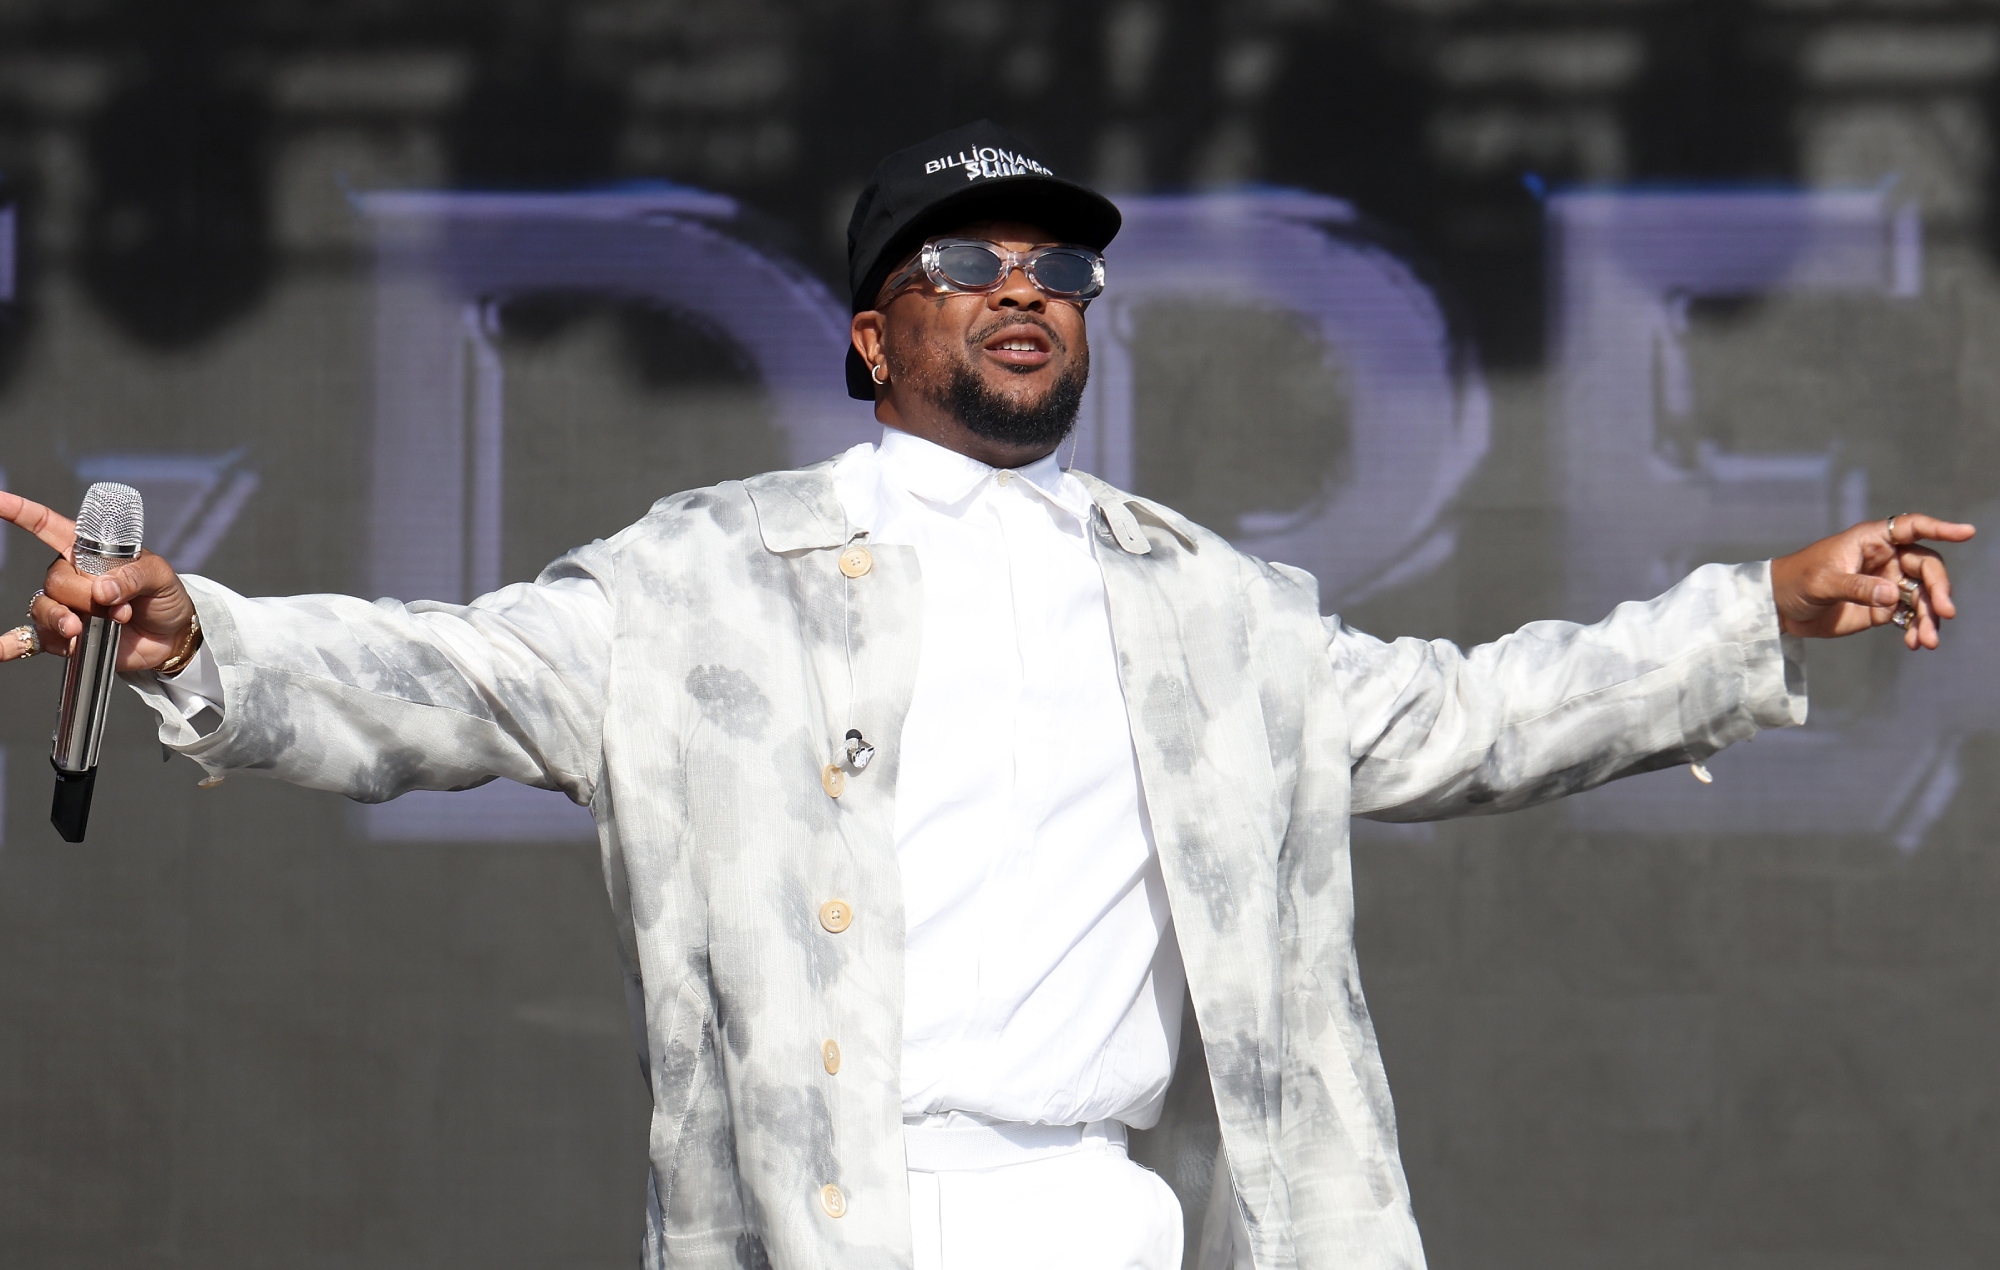 The-Dream (Photo by Taylor Hill/Getty Images for Live Nation Urban)